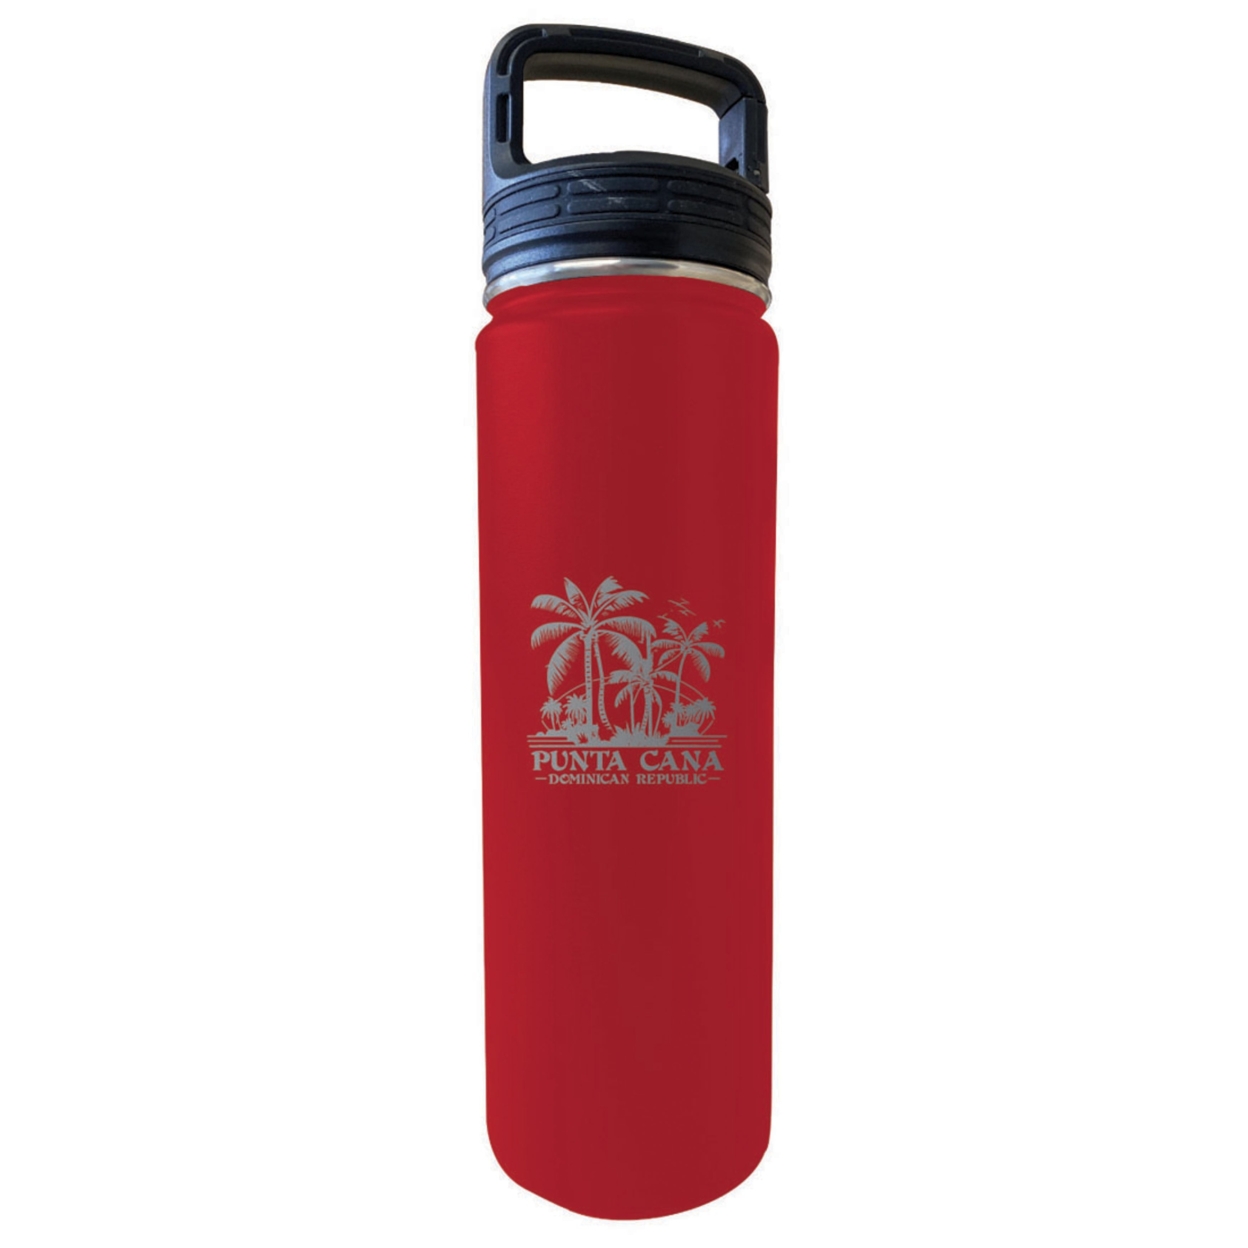 Punta Cana Dominican Republic Souvenir 32 Oz Insulated Stainless Steel Tumbler - Red, Palm 3